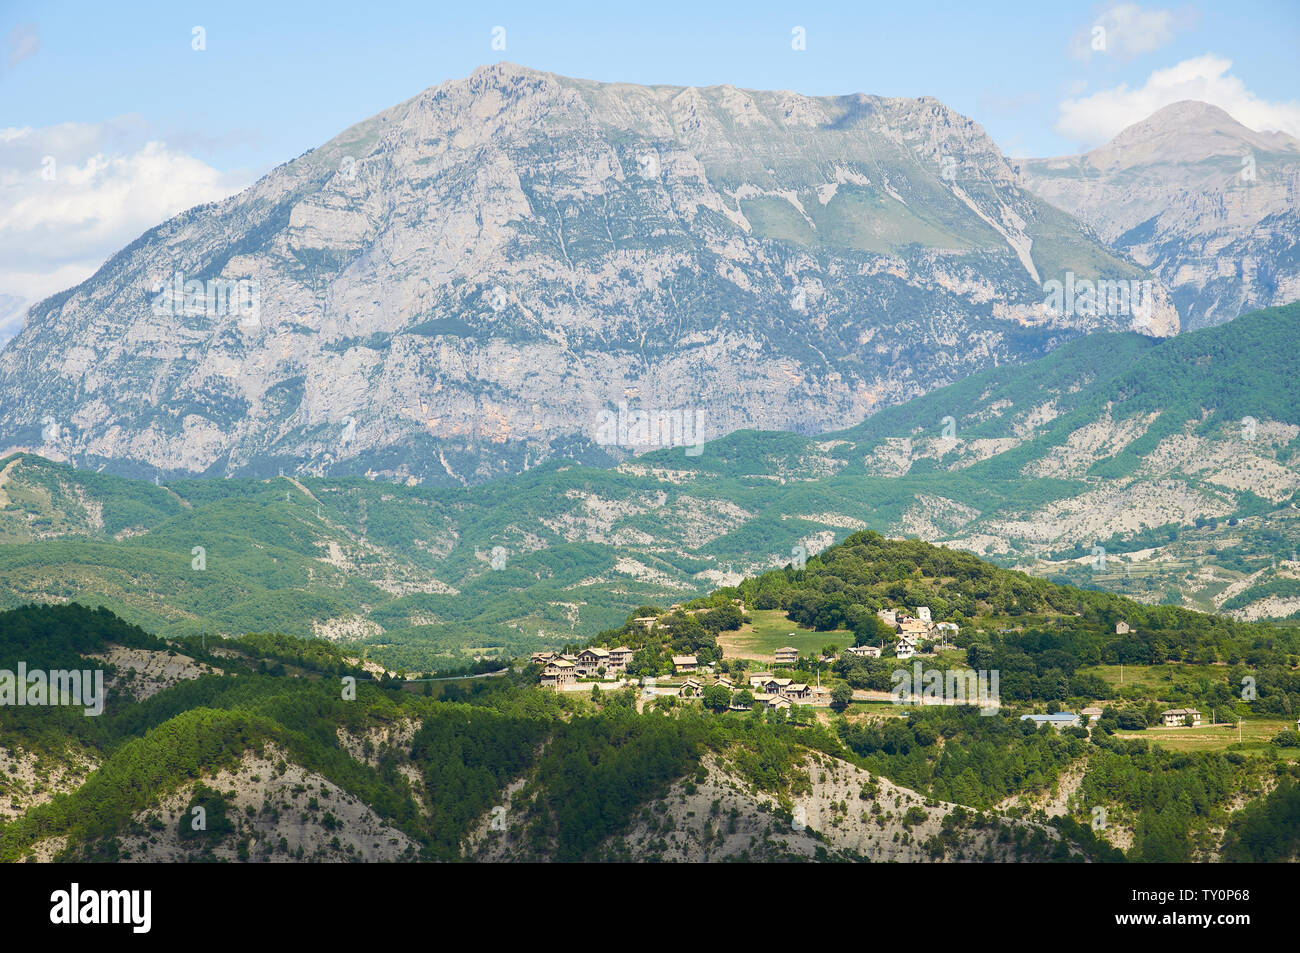 Landscape view of the town of Belsierre with Punta Llerga peak in the background from Vió valley (Laspuña, Sobrarbe, Huesca, Pyrenees, Aragon, Spain) Stock Photo